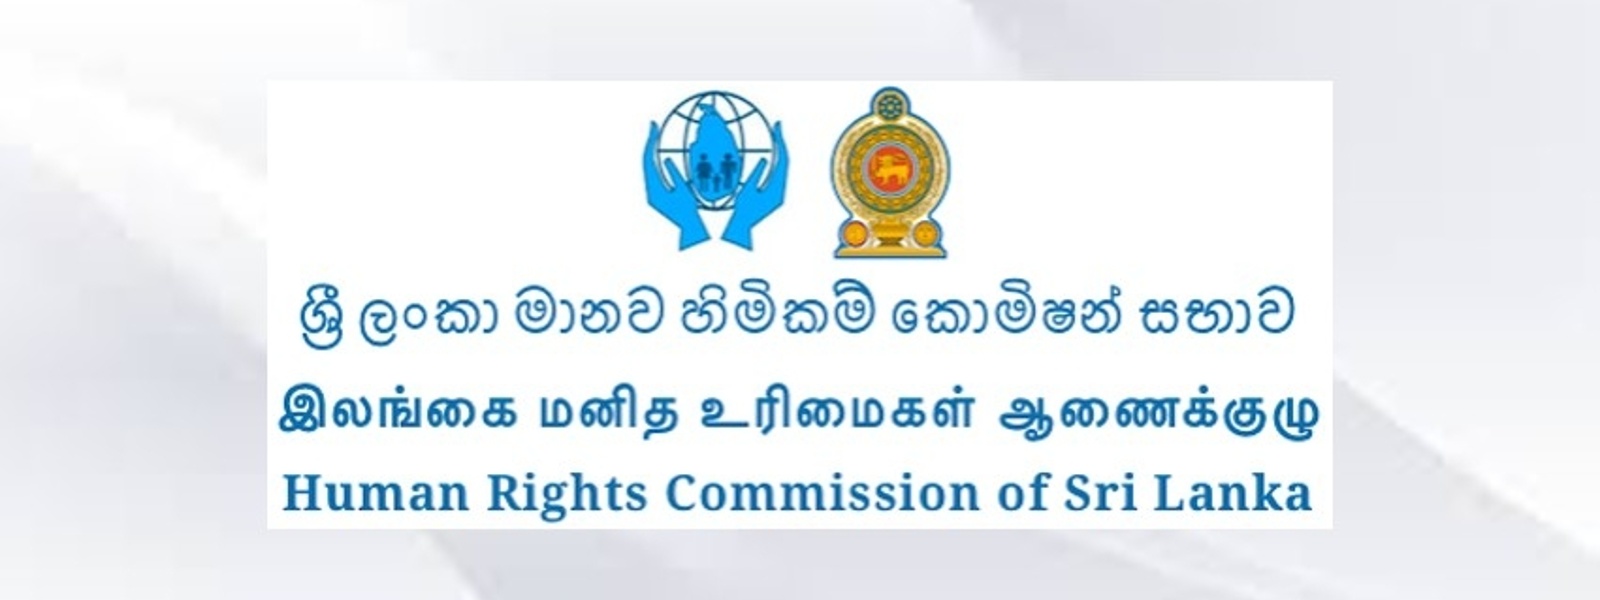 “Transfer STF’s Romesh Liyanage until investigation into attack on News 1st reporters is concluded” – Human Rights Commission tells IGP